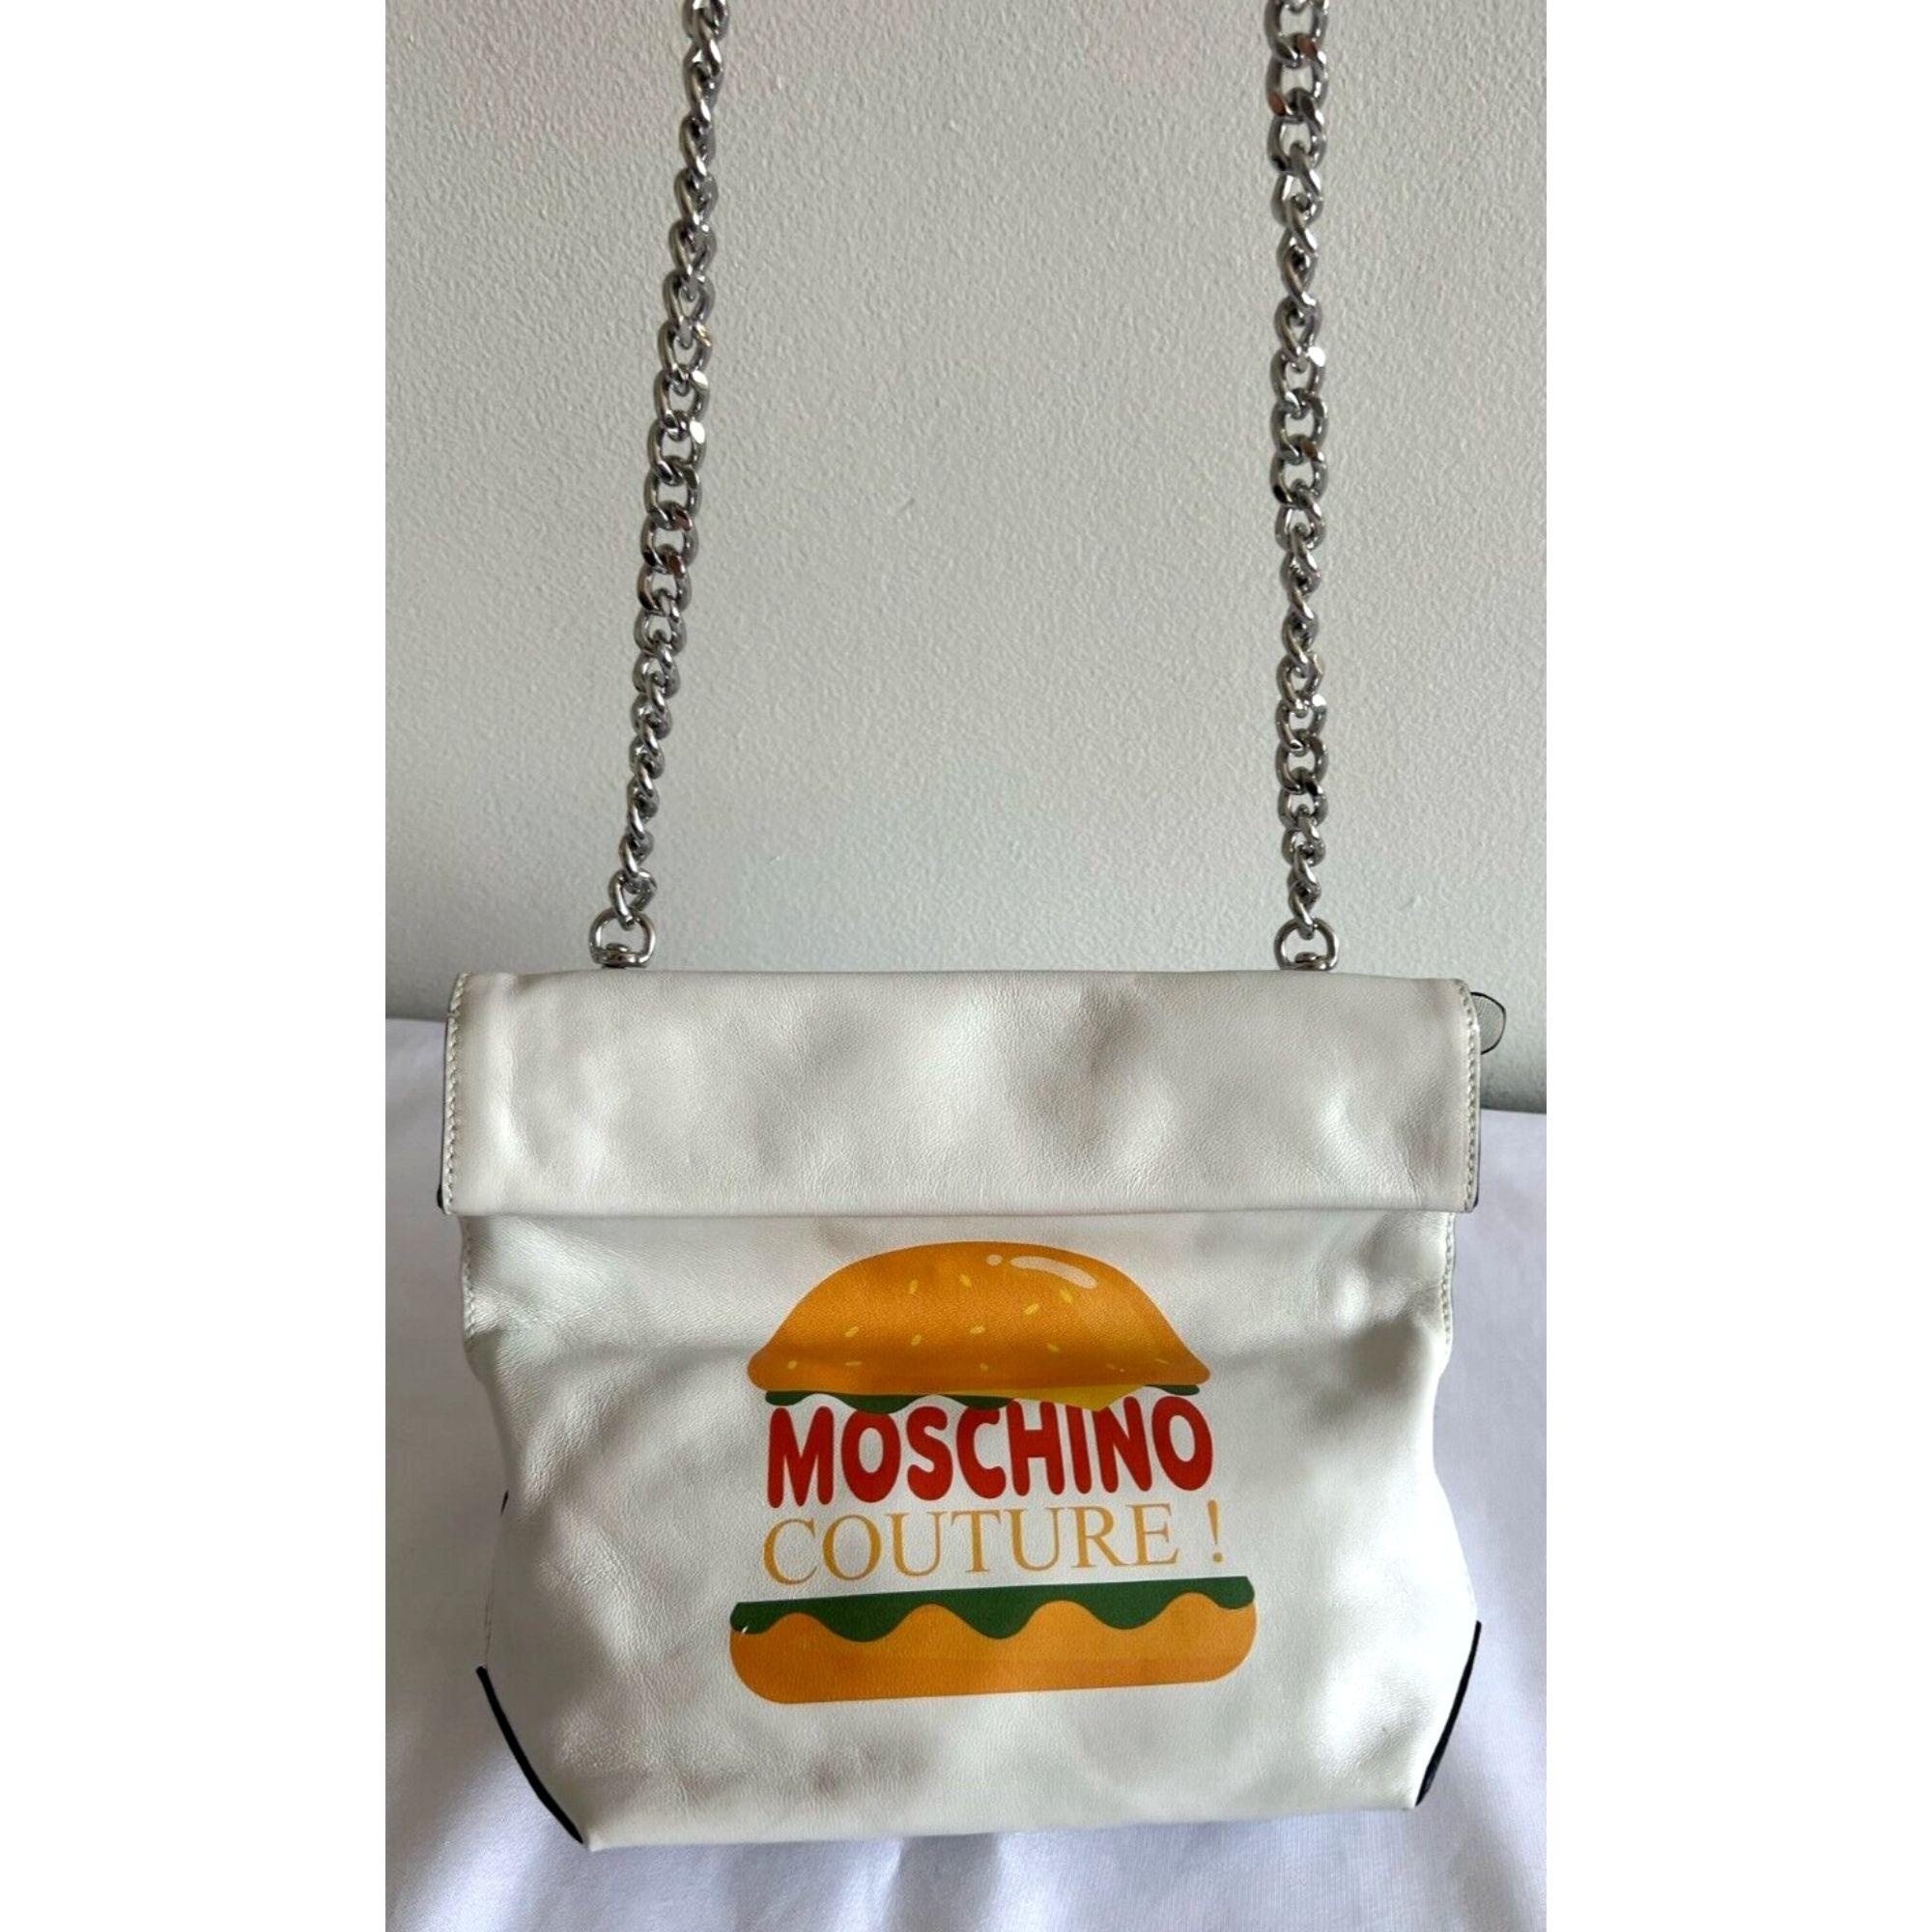 SS22 Moschino Couture The Diner White Leather Lunch Bag Hamburger In New Condition For Sale In Palm Springs, CA